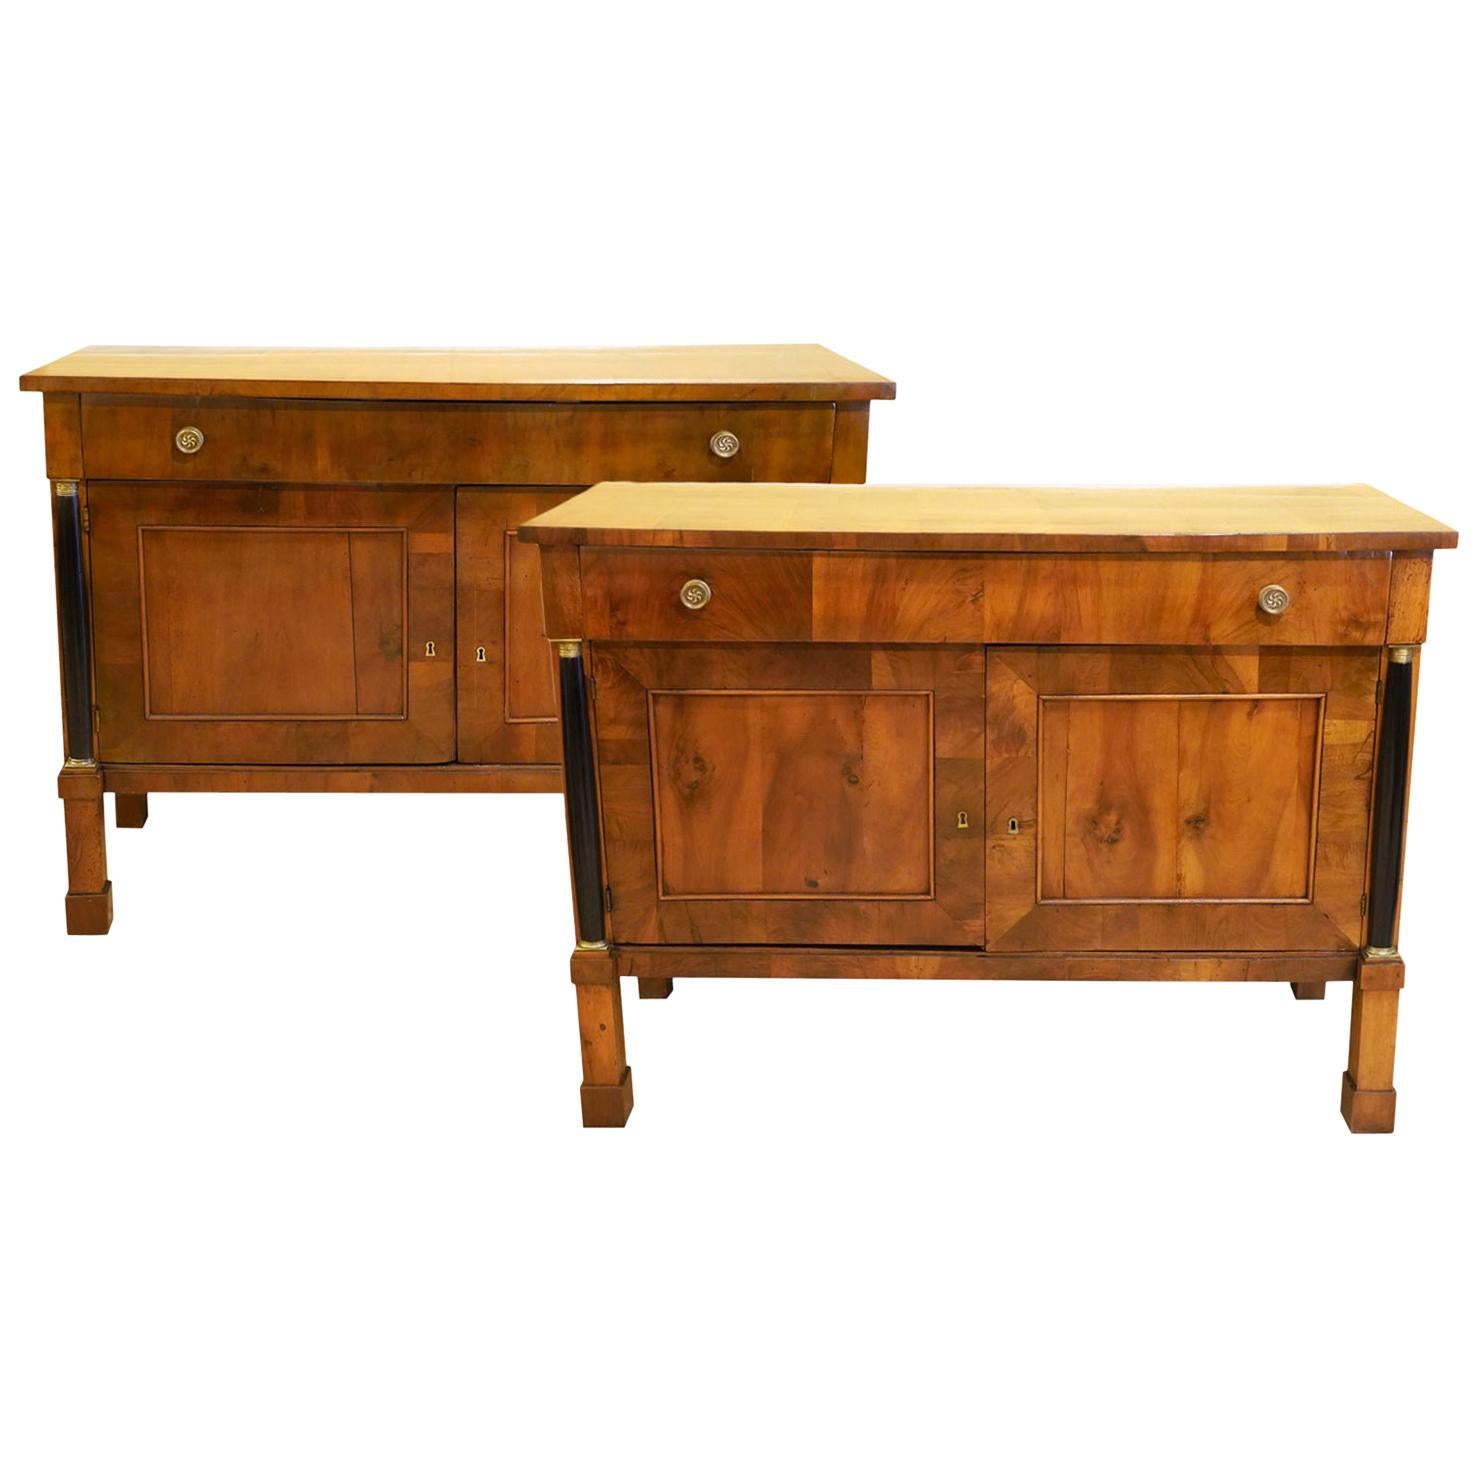 Pair of Austrian-Italian Neoclassical Walnut Cabinets or Sideboards